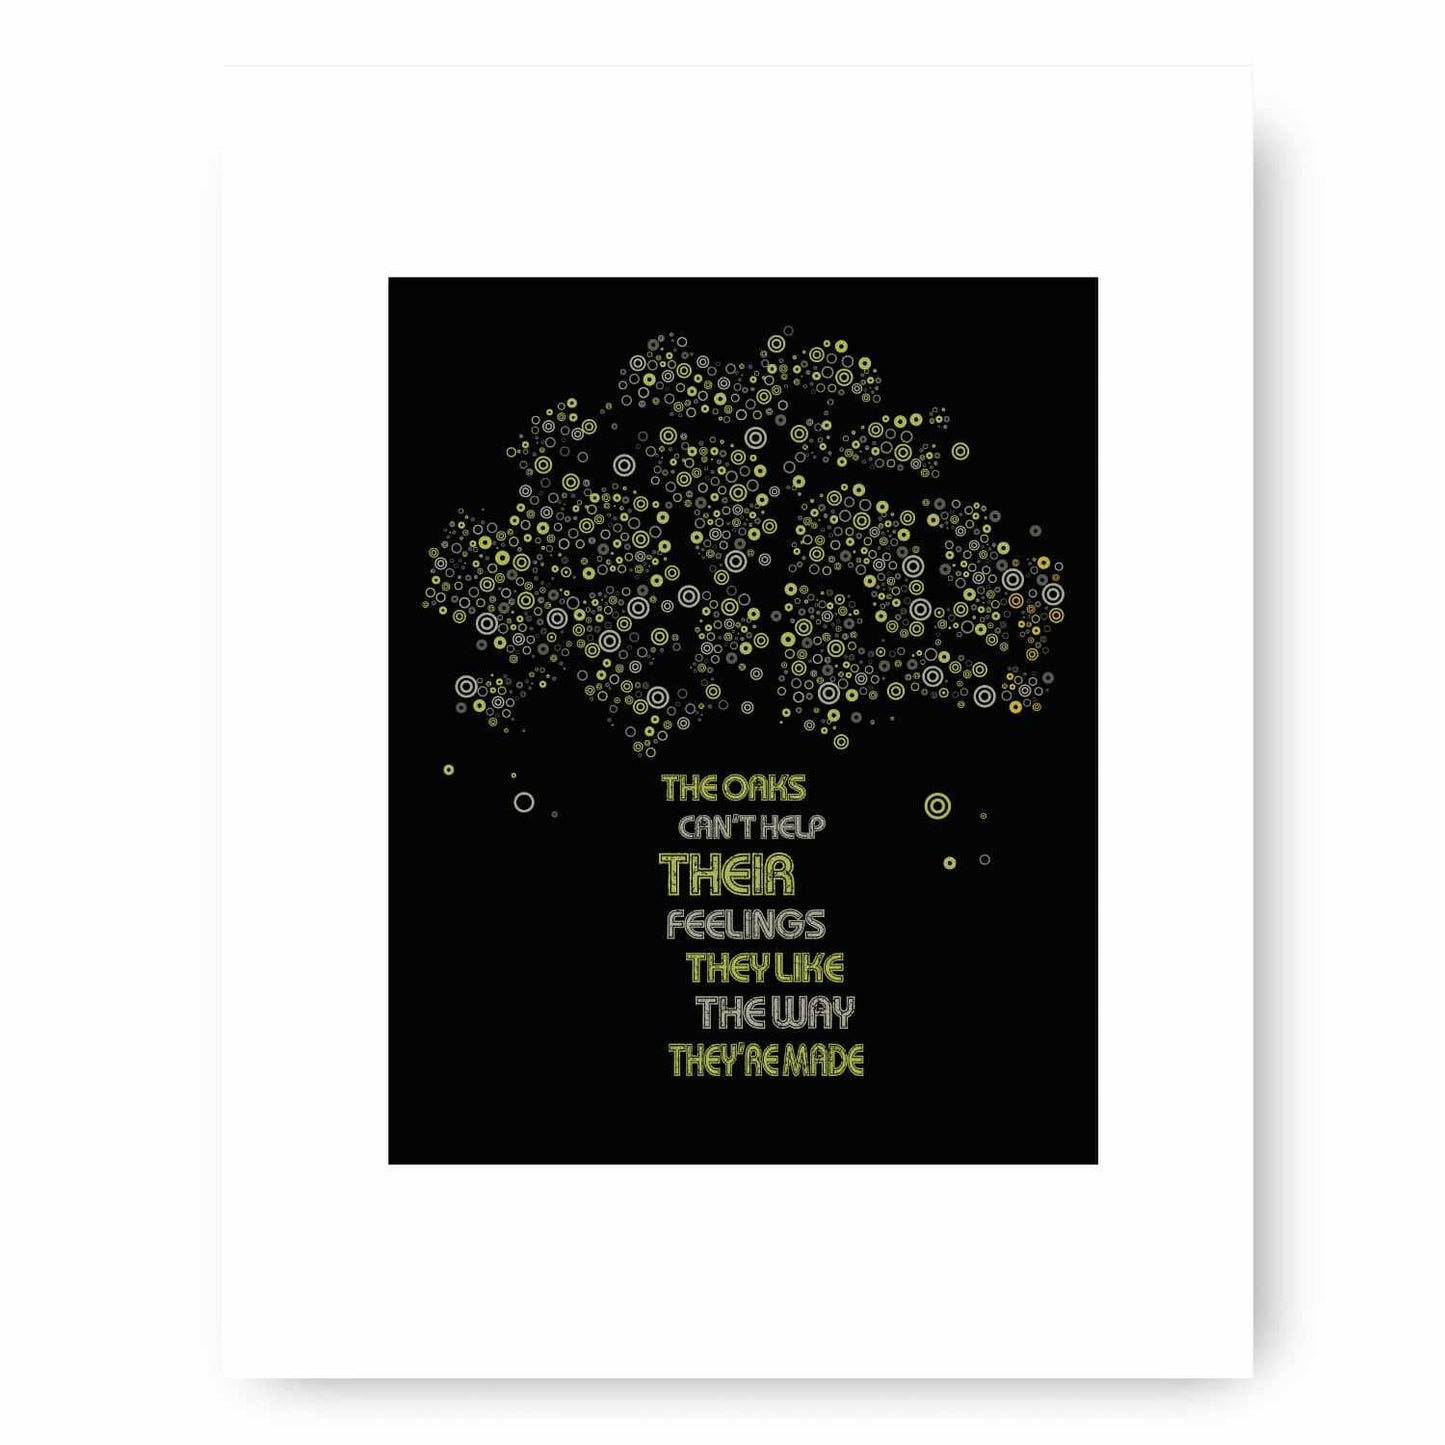 The Trees by Rush - Lyric Inspired Song Art Rock Music Print Song Lyrics Art Song Lyrics Art 8x10 White Matted Print 